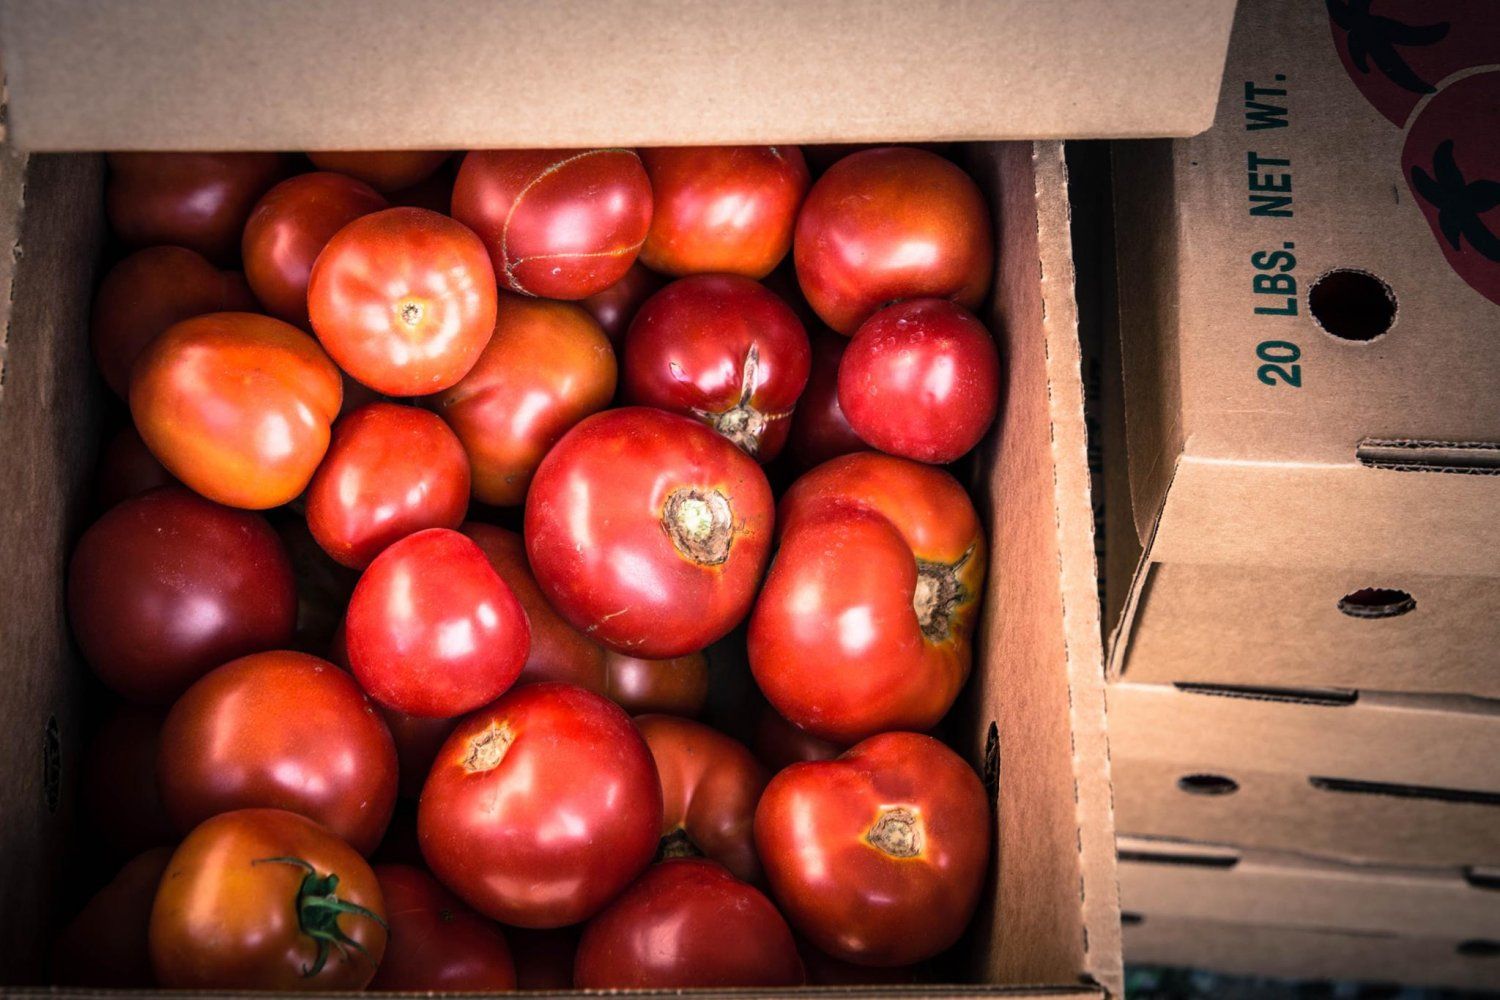 Next Happening: Farm Happenings for Suffield Farm Stand Bulk Tomato Aale, Saturday Aug 21, 2021